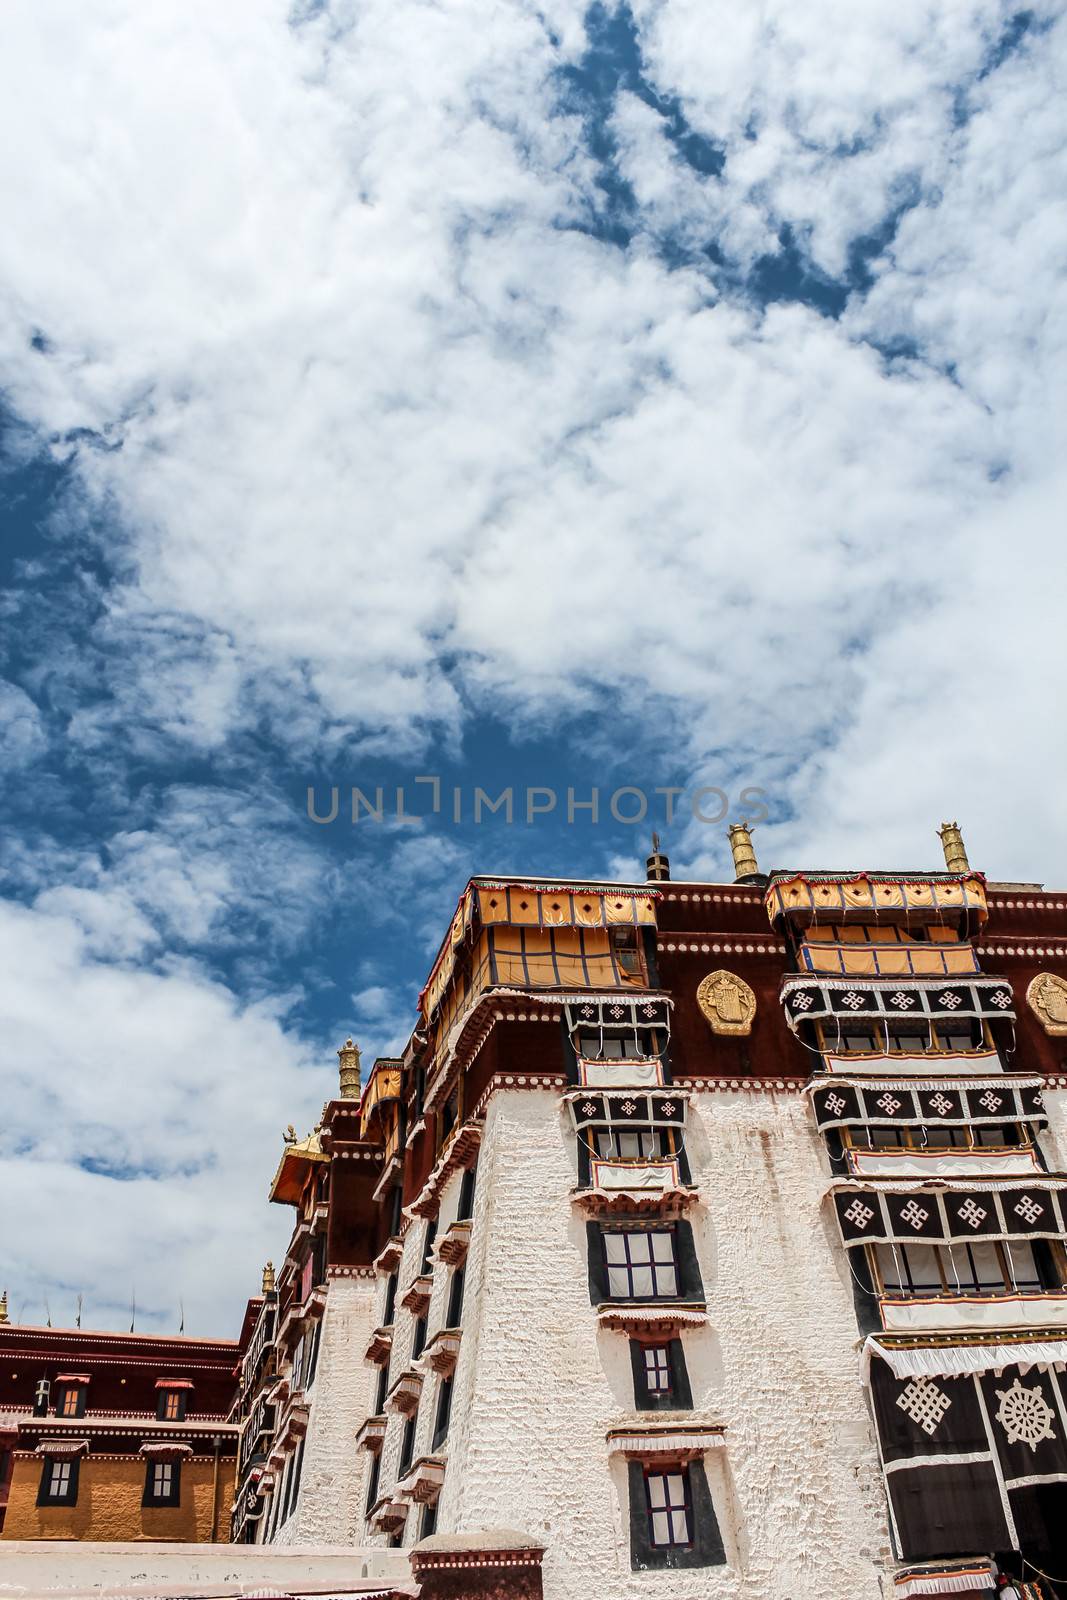 Exterior of Potala Palace in Tibet during a sunny day